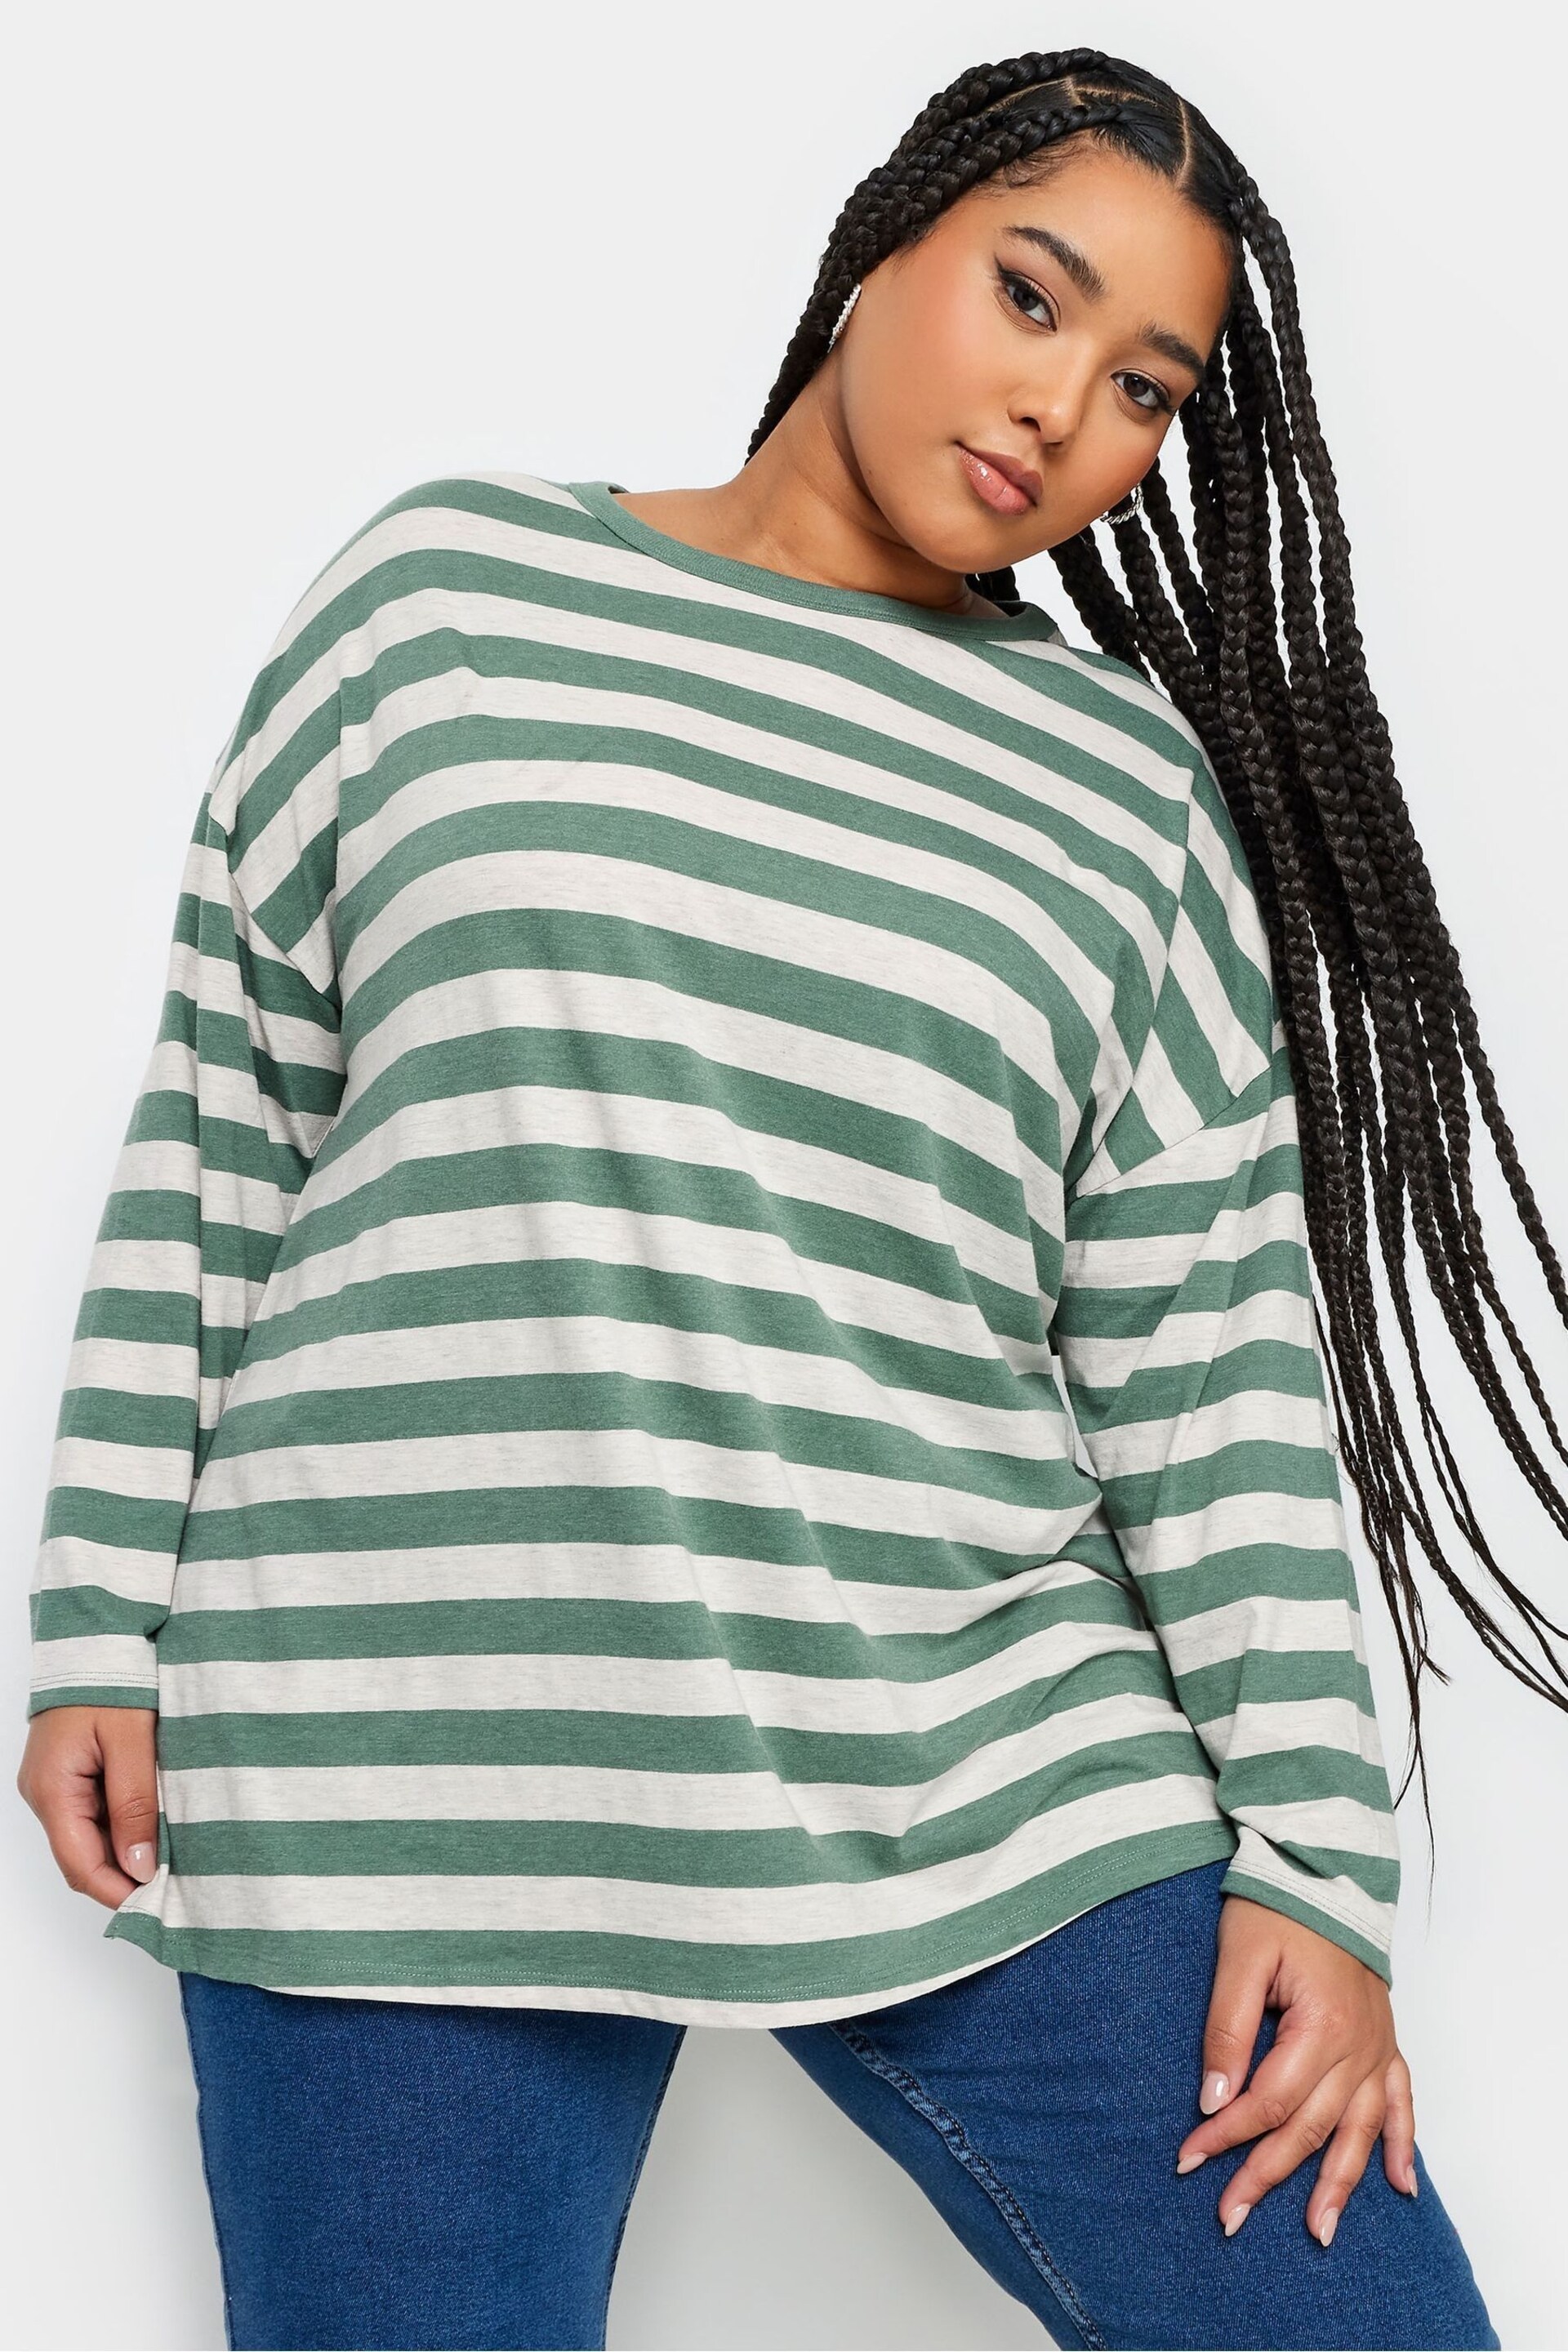 Yours Curve Green Fashion Throw On Stripe Top - Image 1 of 4